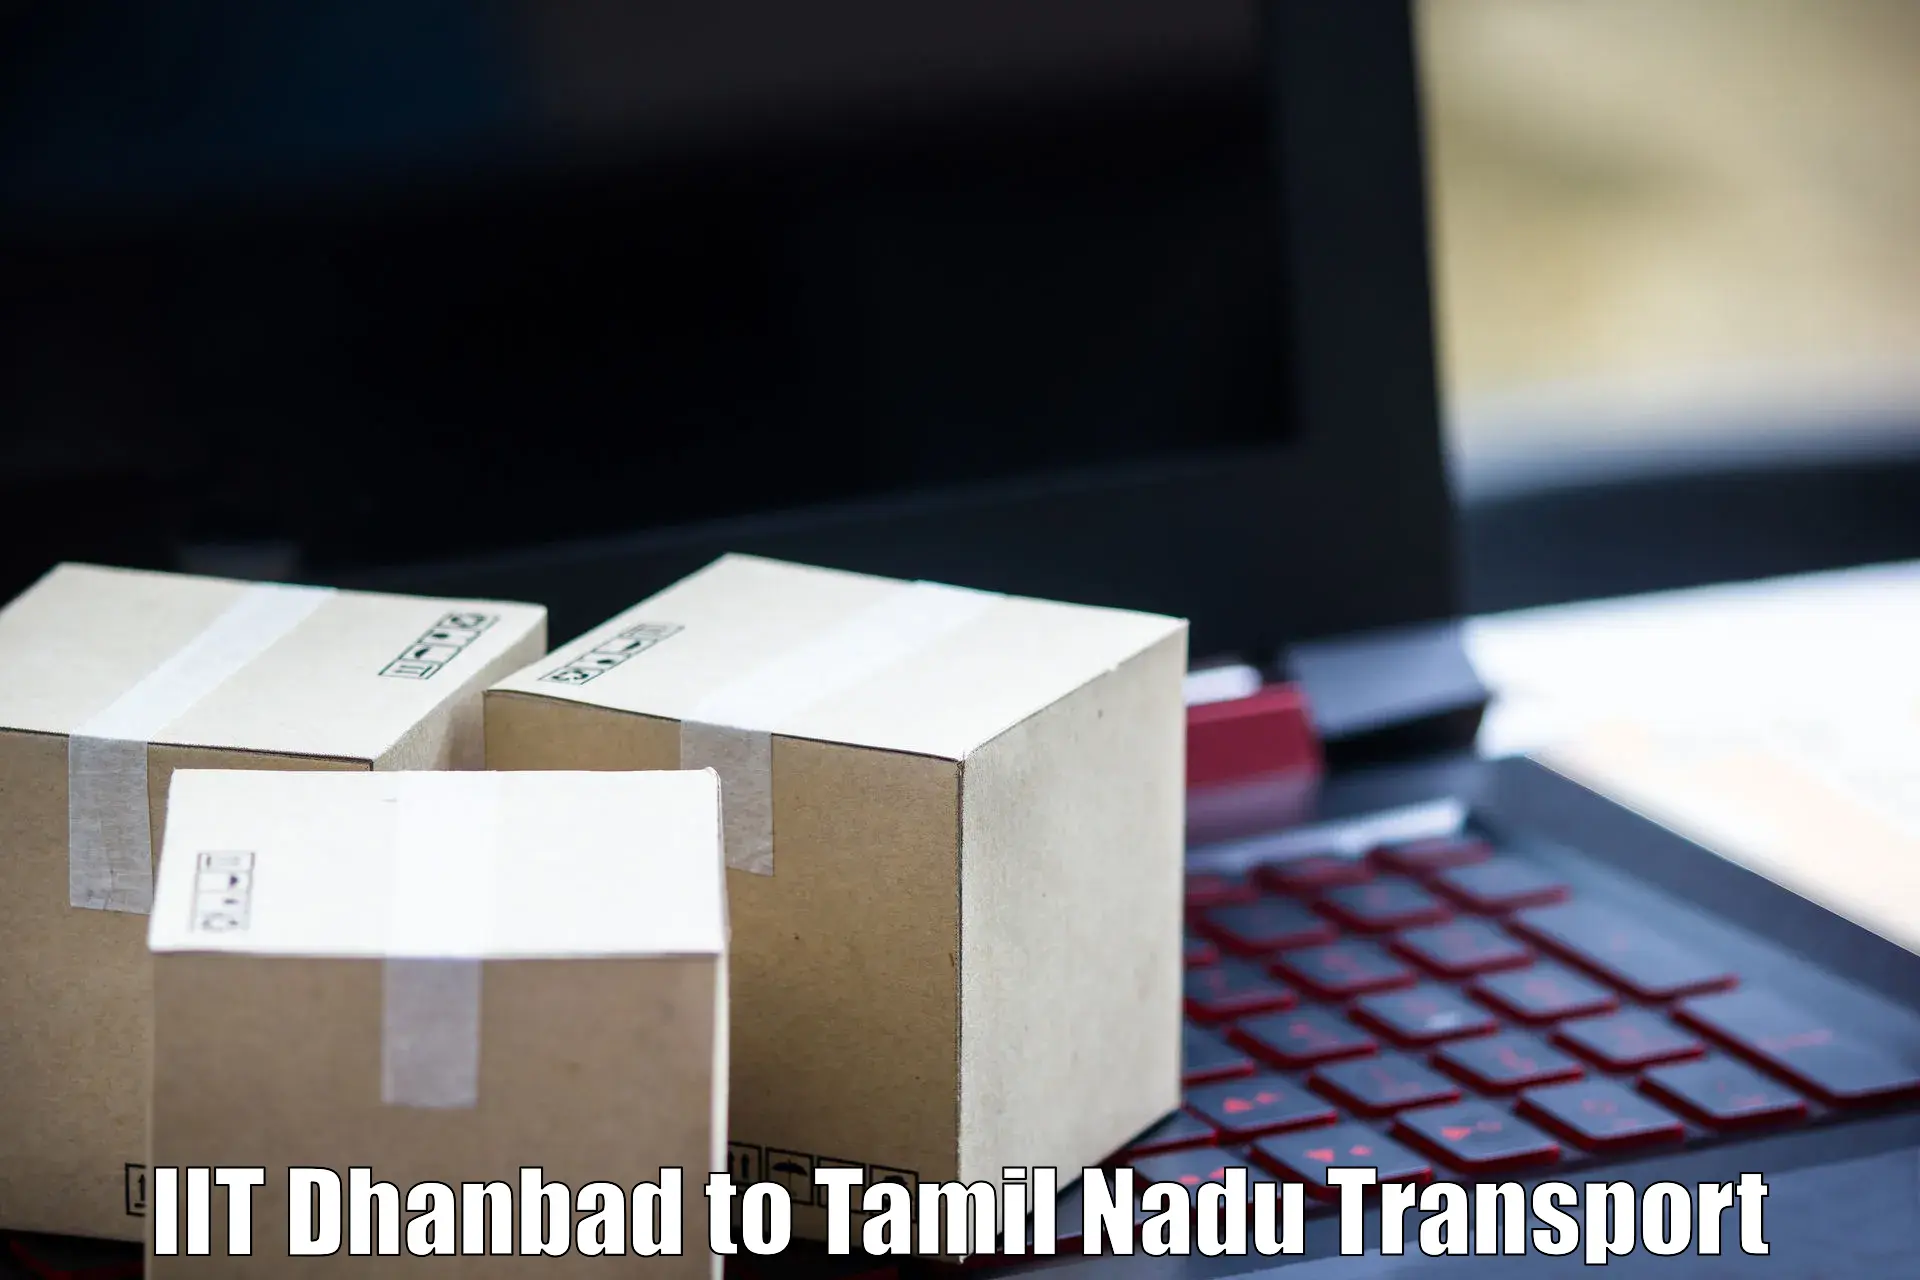 Commercial transport service IIT Dhanbad to Rajapalayam